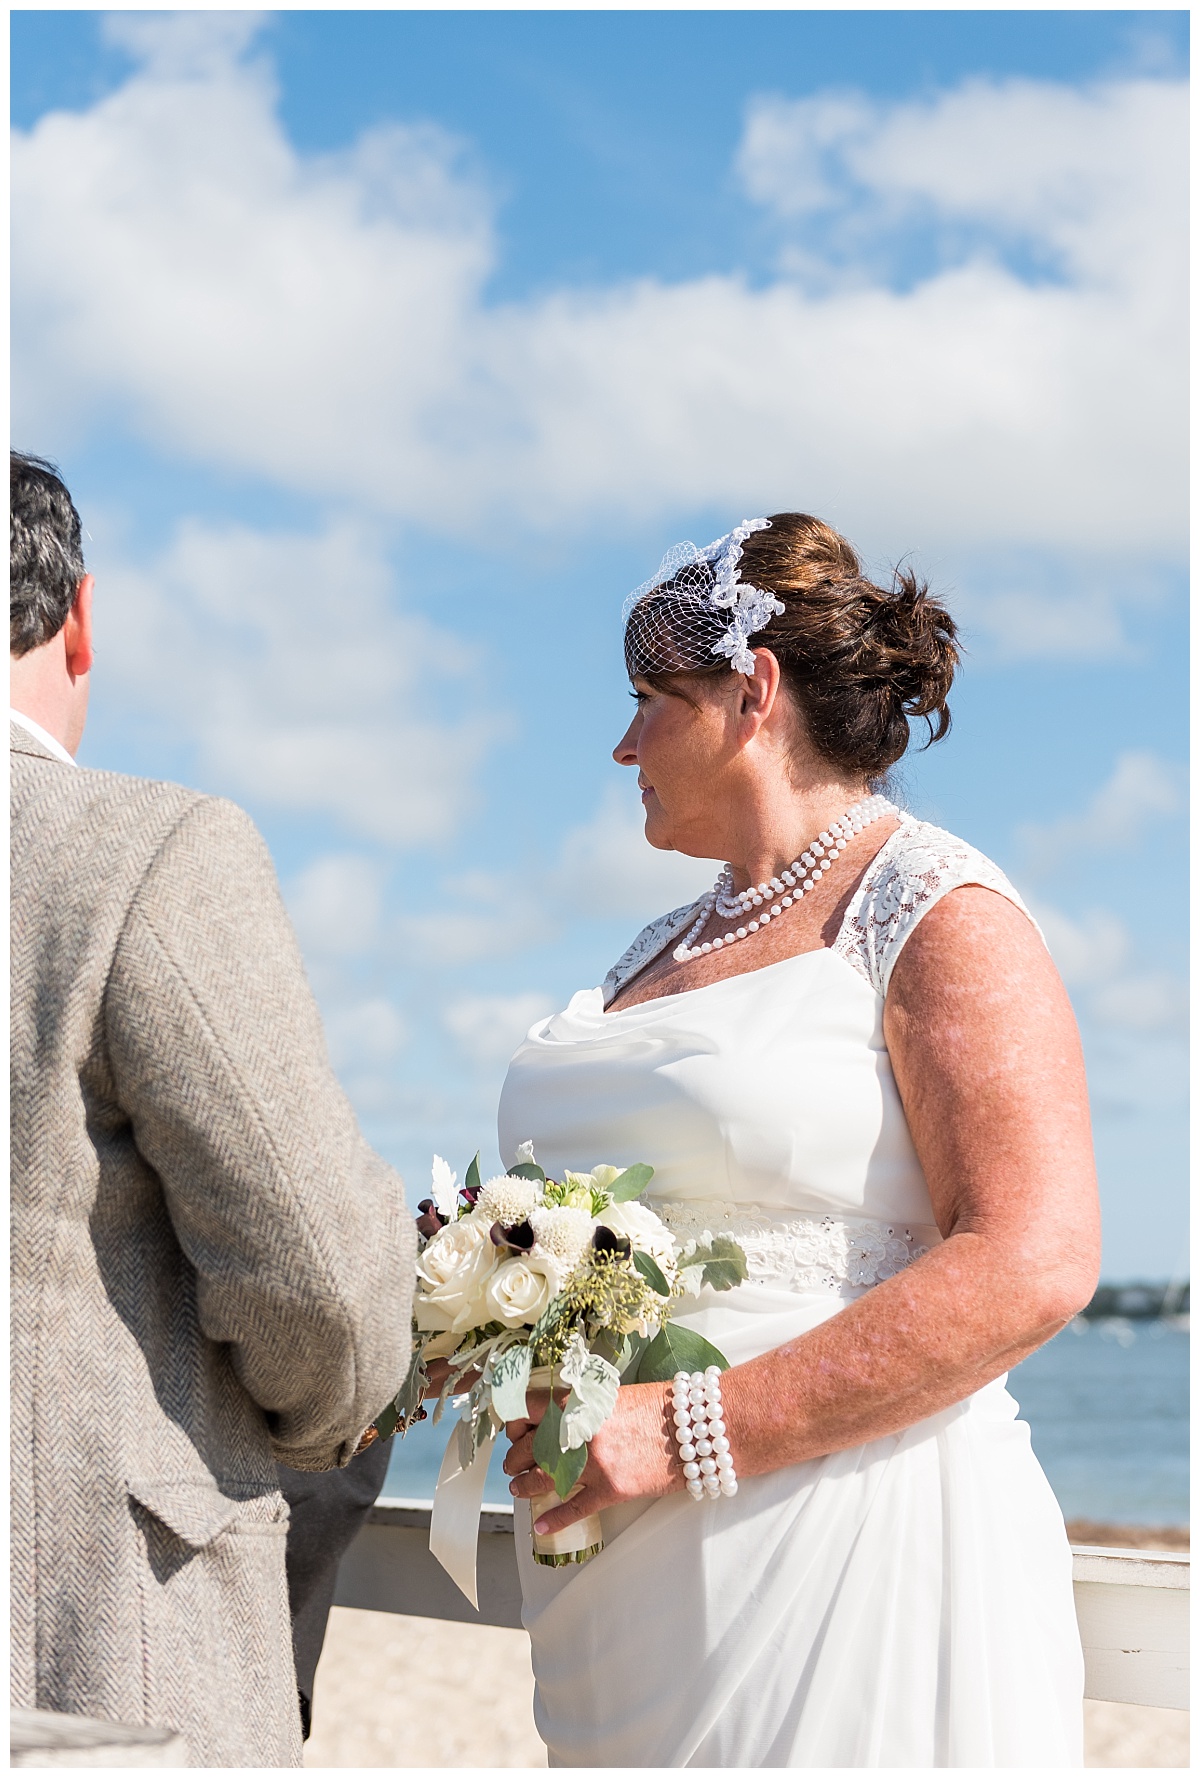 A Beautiful Intimate Elopement at the Nantucket Brant Point Lighthouse